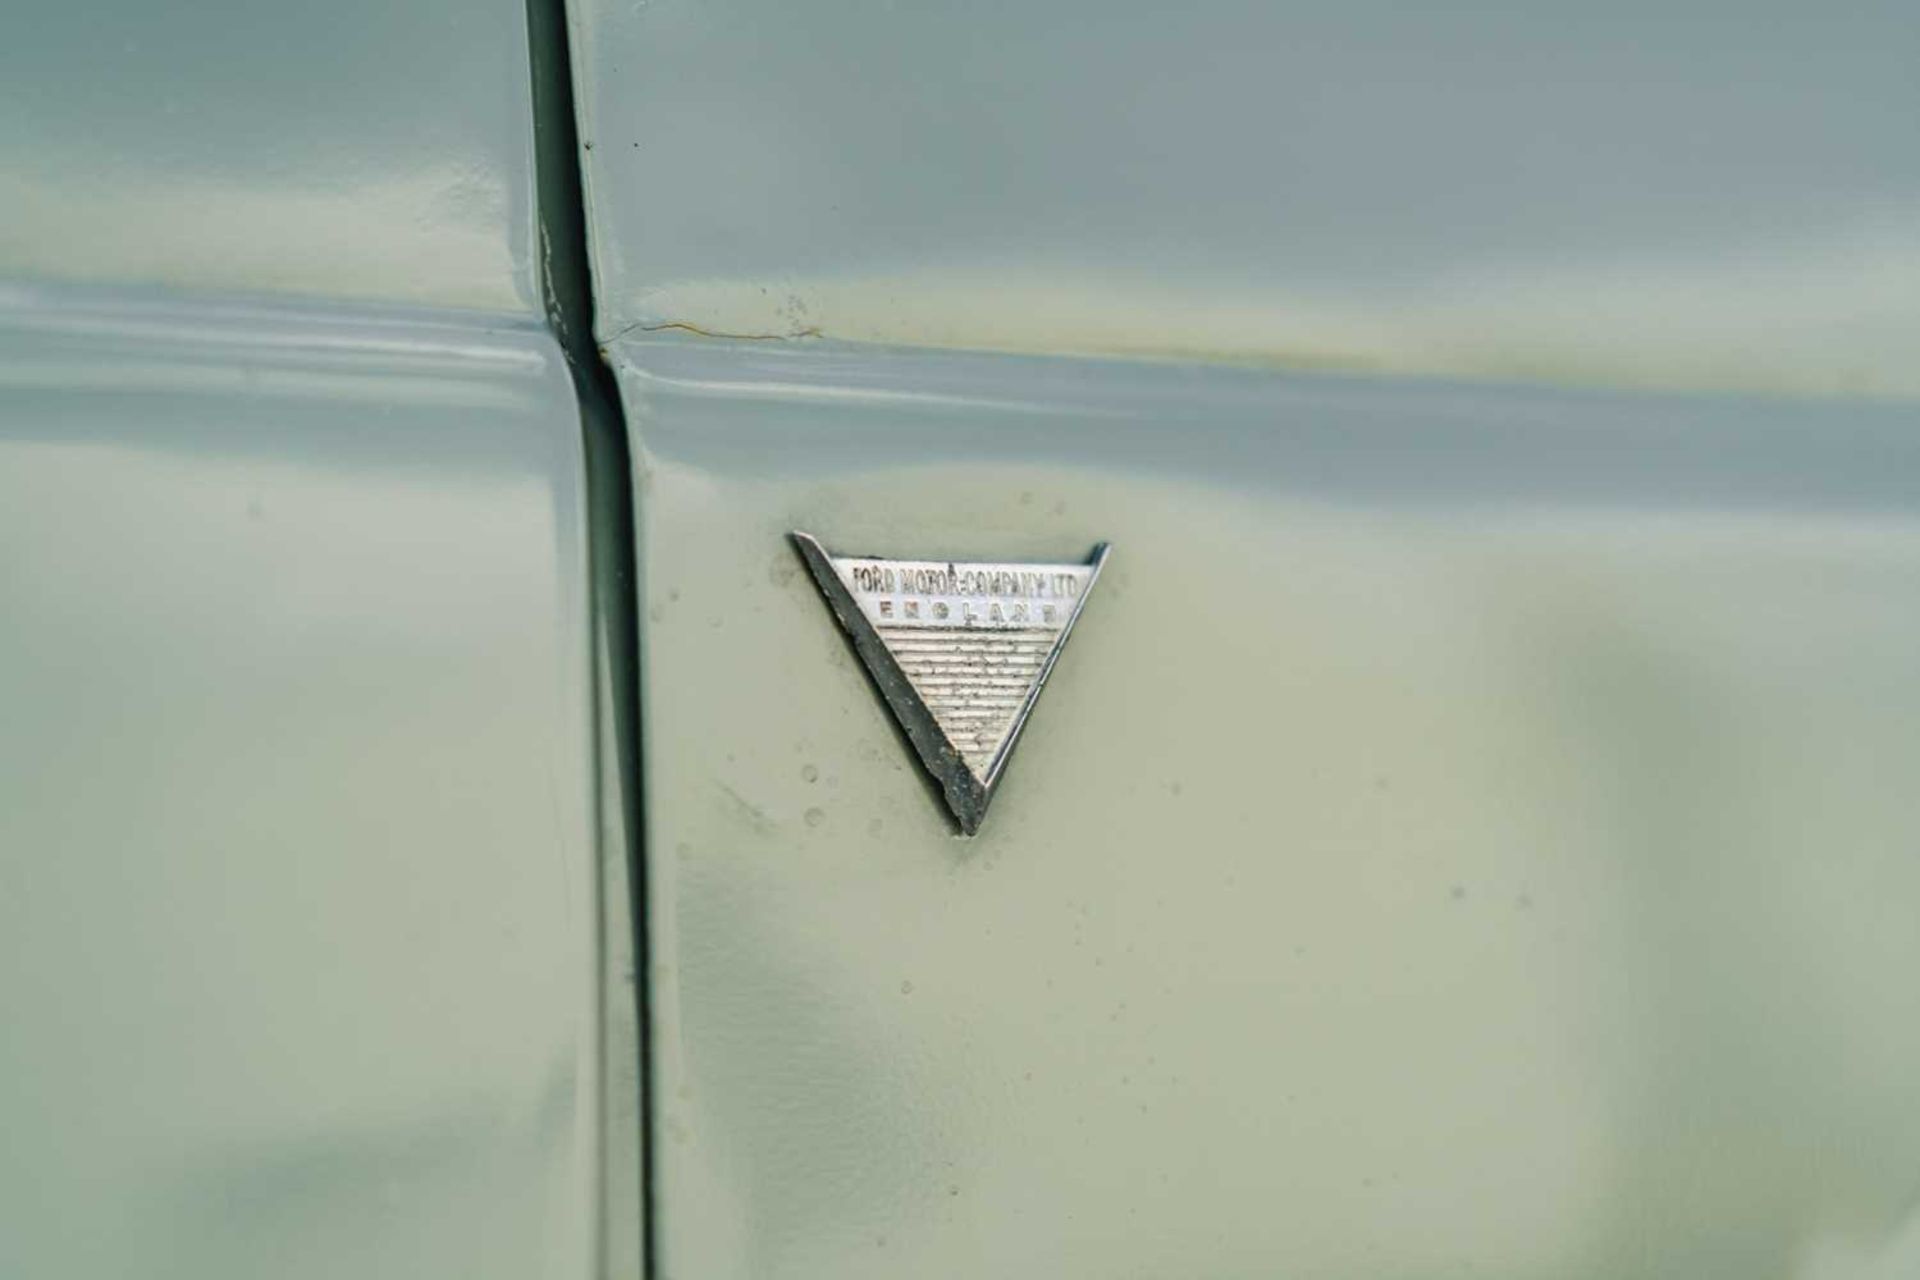 1961 Ford Thames - Image 23 of 51